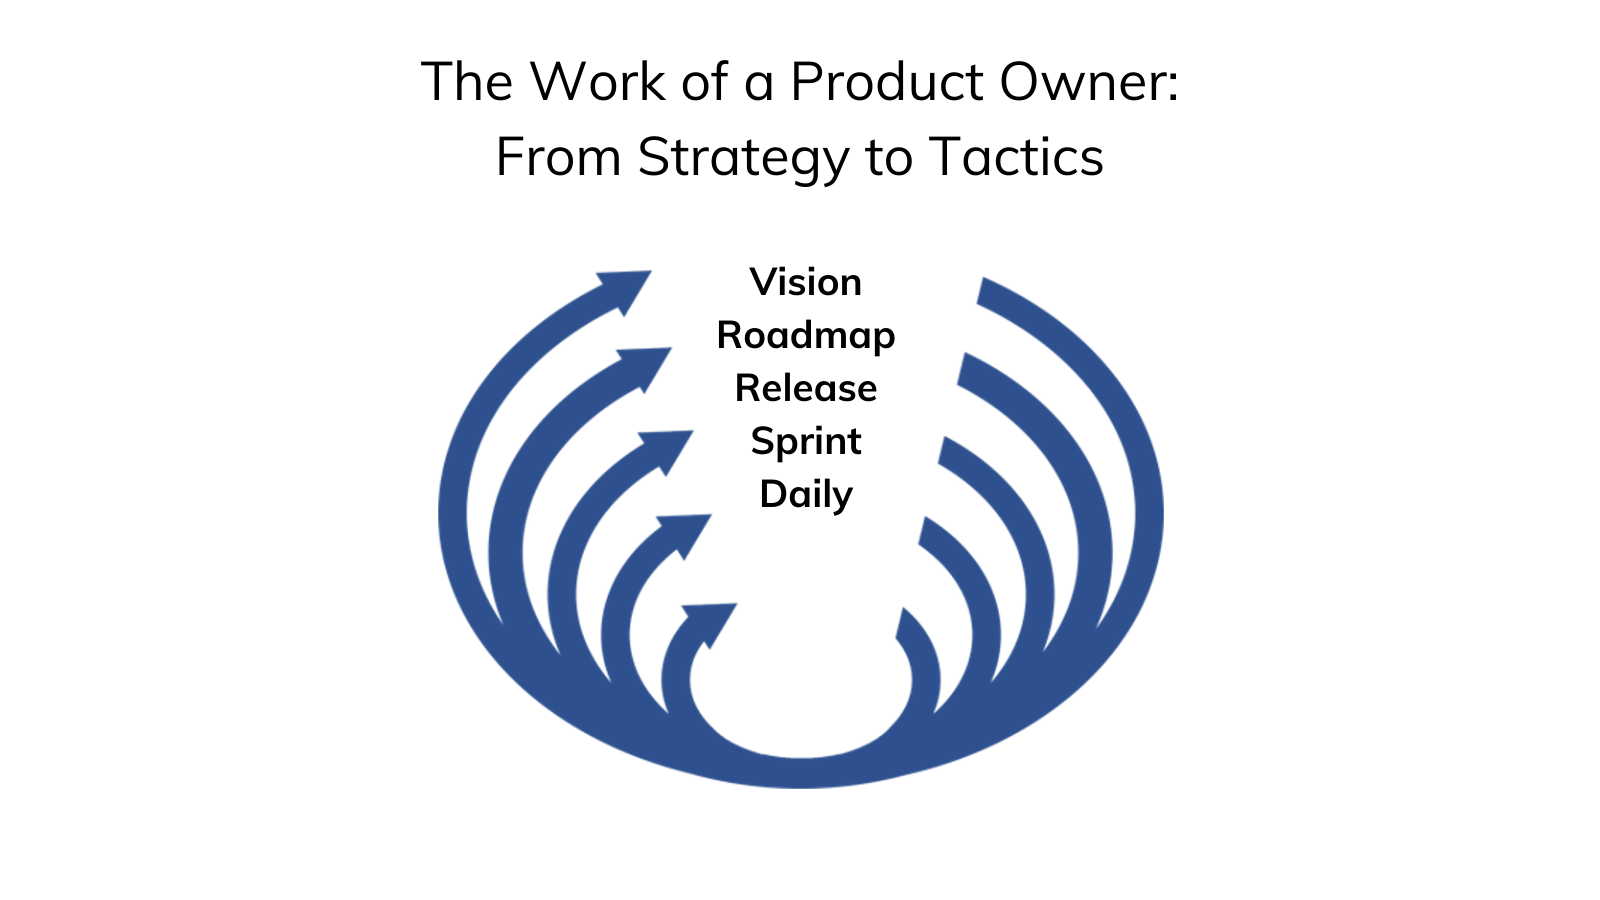 The Work of a Product Owner: From Strategy to Tactics, including Vision, Roadmap, Release, Sprint, and Daily Work